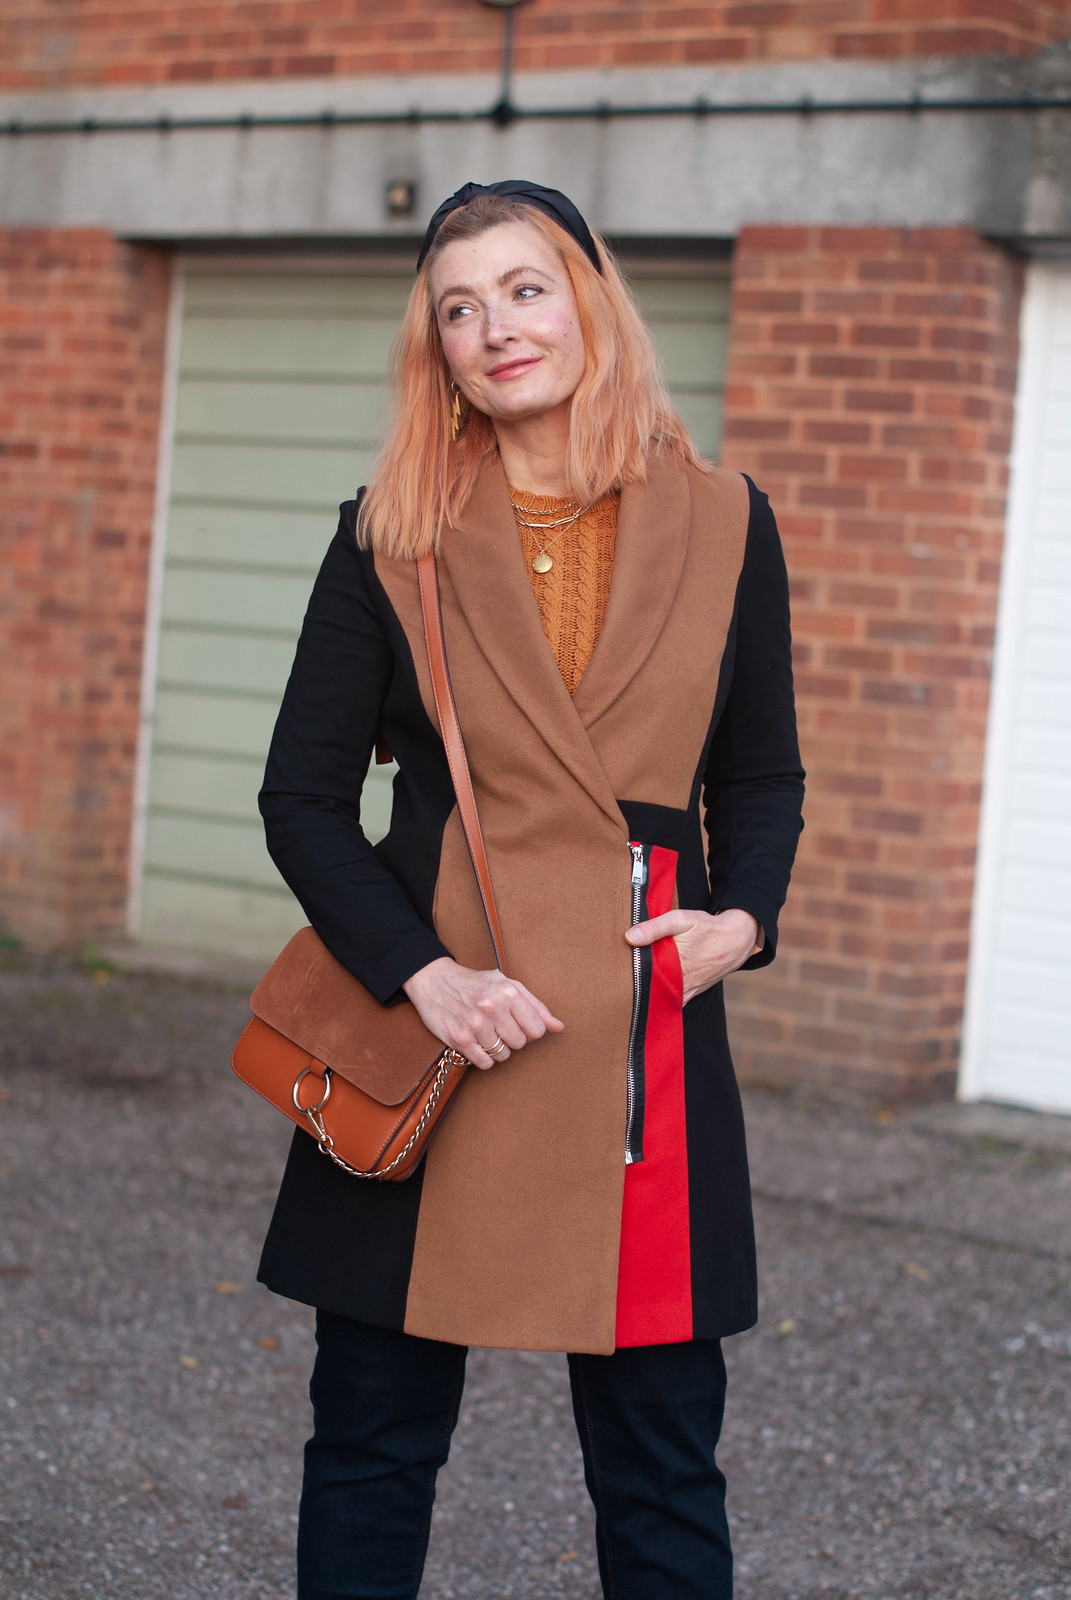 A Colour Block Winter Coat With Straight Leg Jeans | Not Dressed As lamb, over 40 style